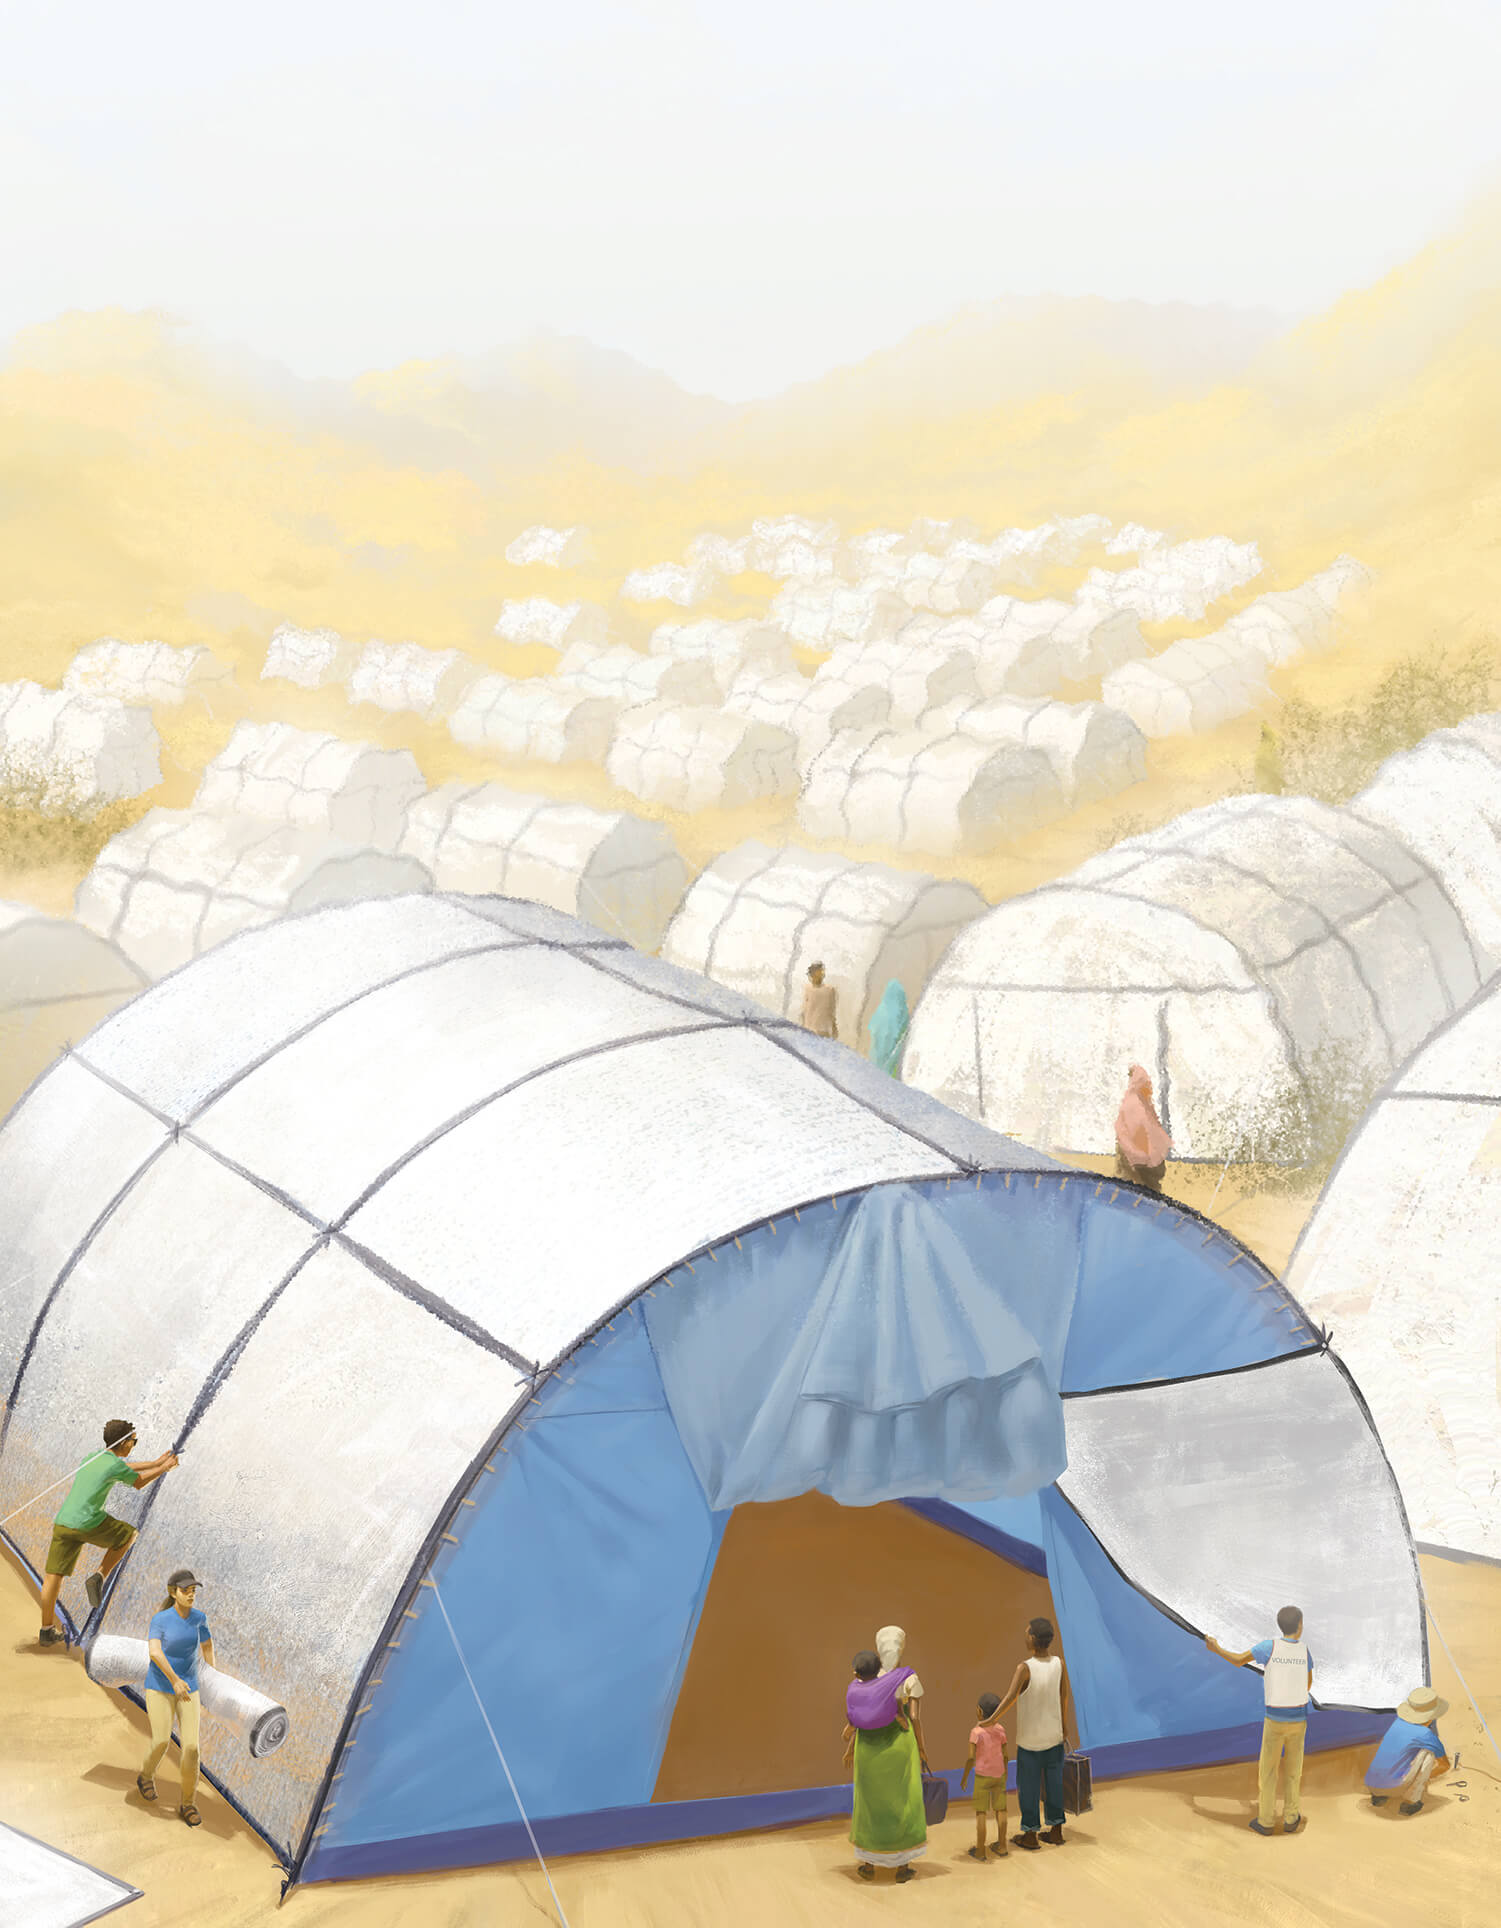 A family of refugees stands in a refugee camp on a hot day waiting to enter a recently-constructed tent. The tent is covered in a reflective material that mitigates some of the heat. 